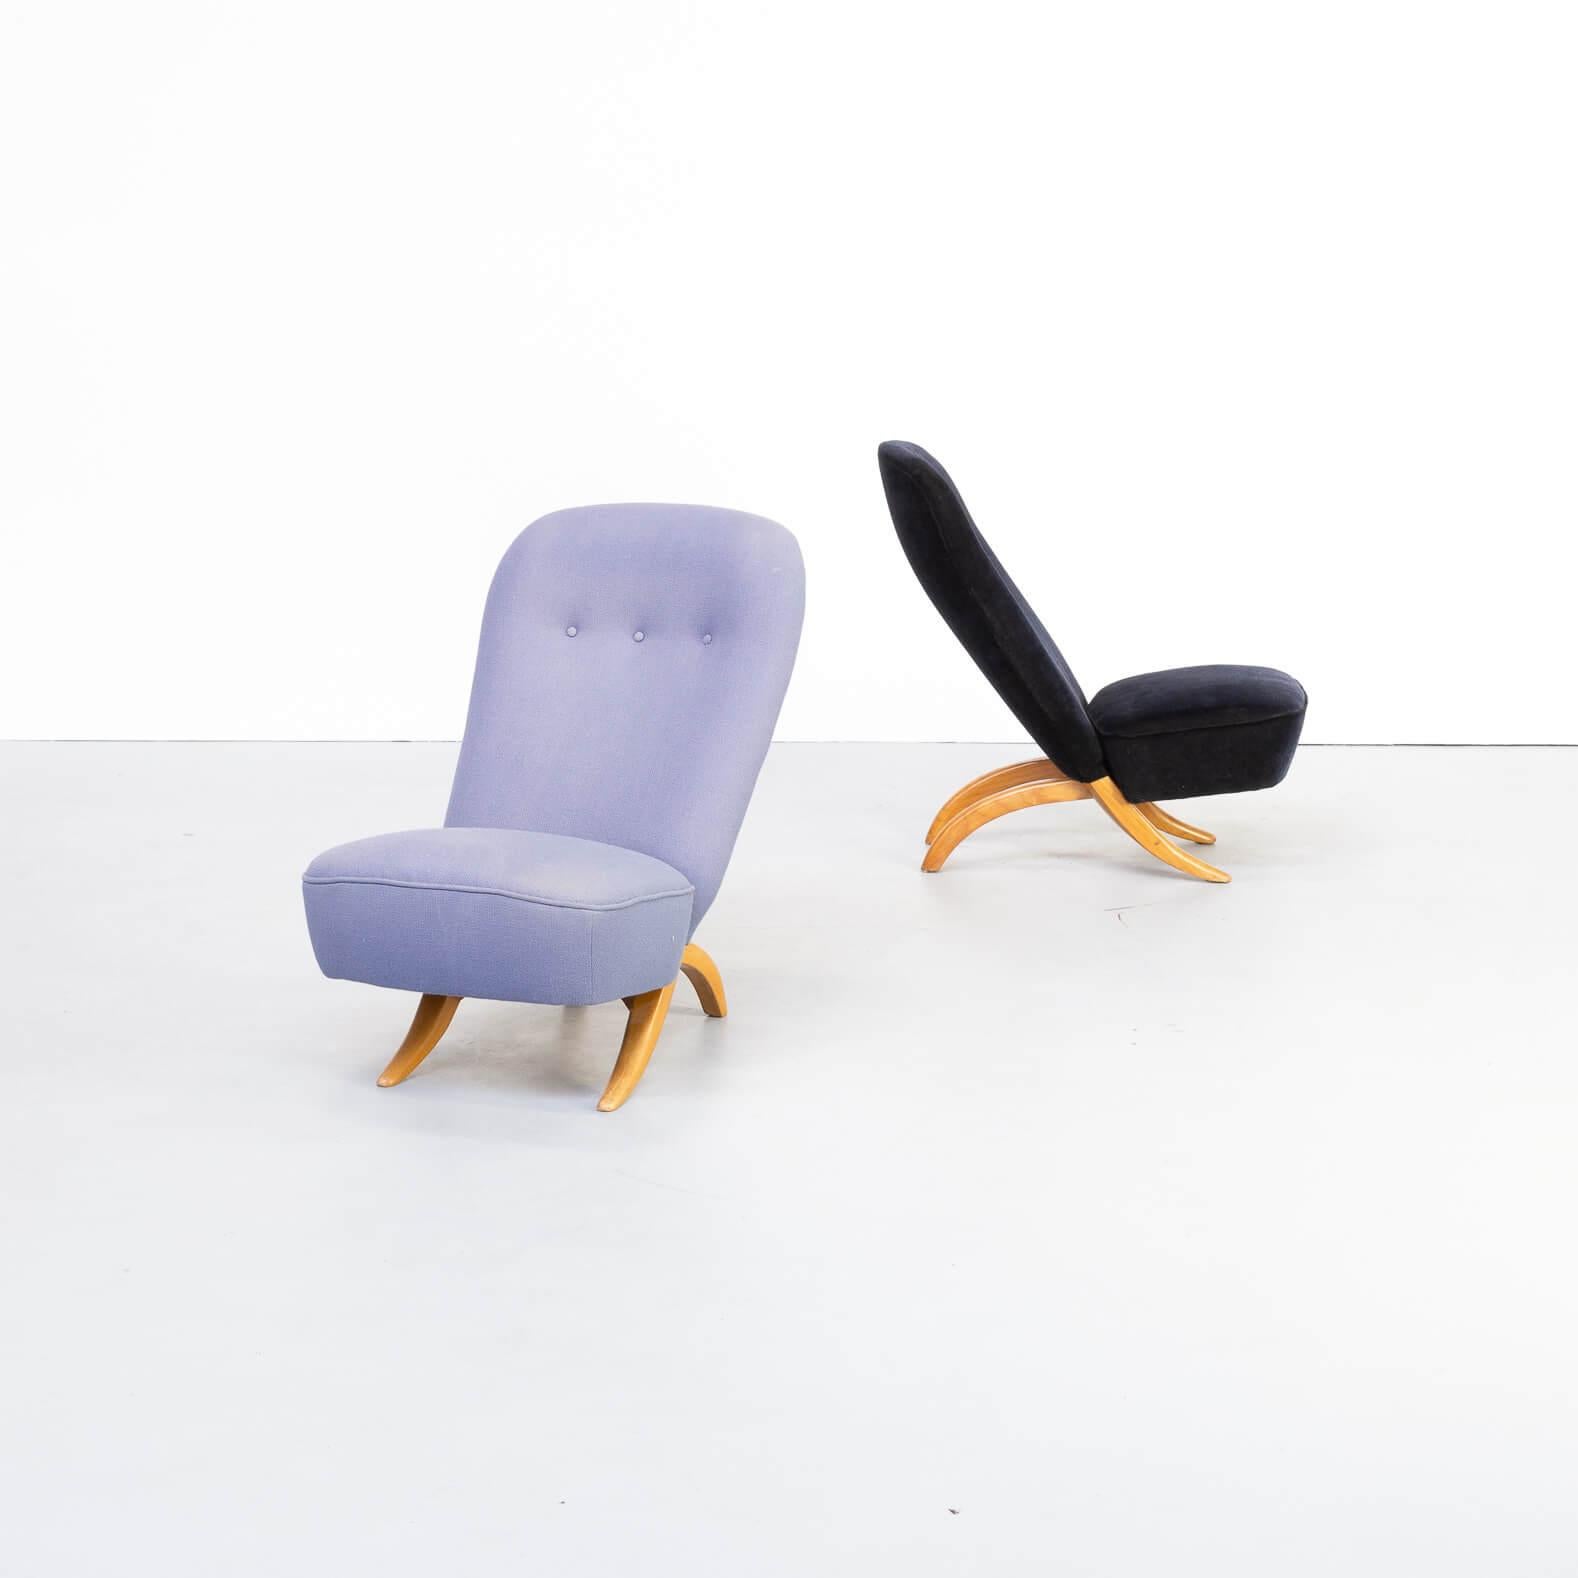 Ruth was Artifort’s first permanent designer and he had a major impact on its design legacy. His most famous pieces include the 1952 Congo Chair and the 1953 Penguin Chair, both of which were constructed from two interlocking pieces that fit